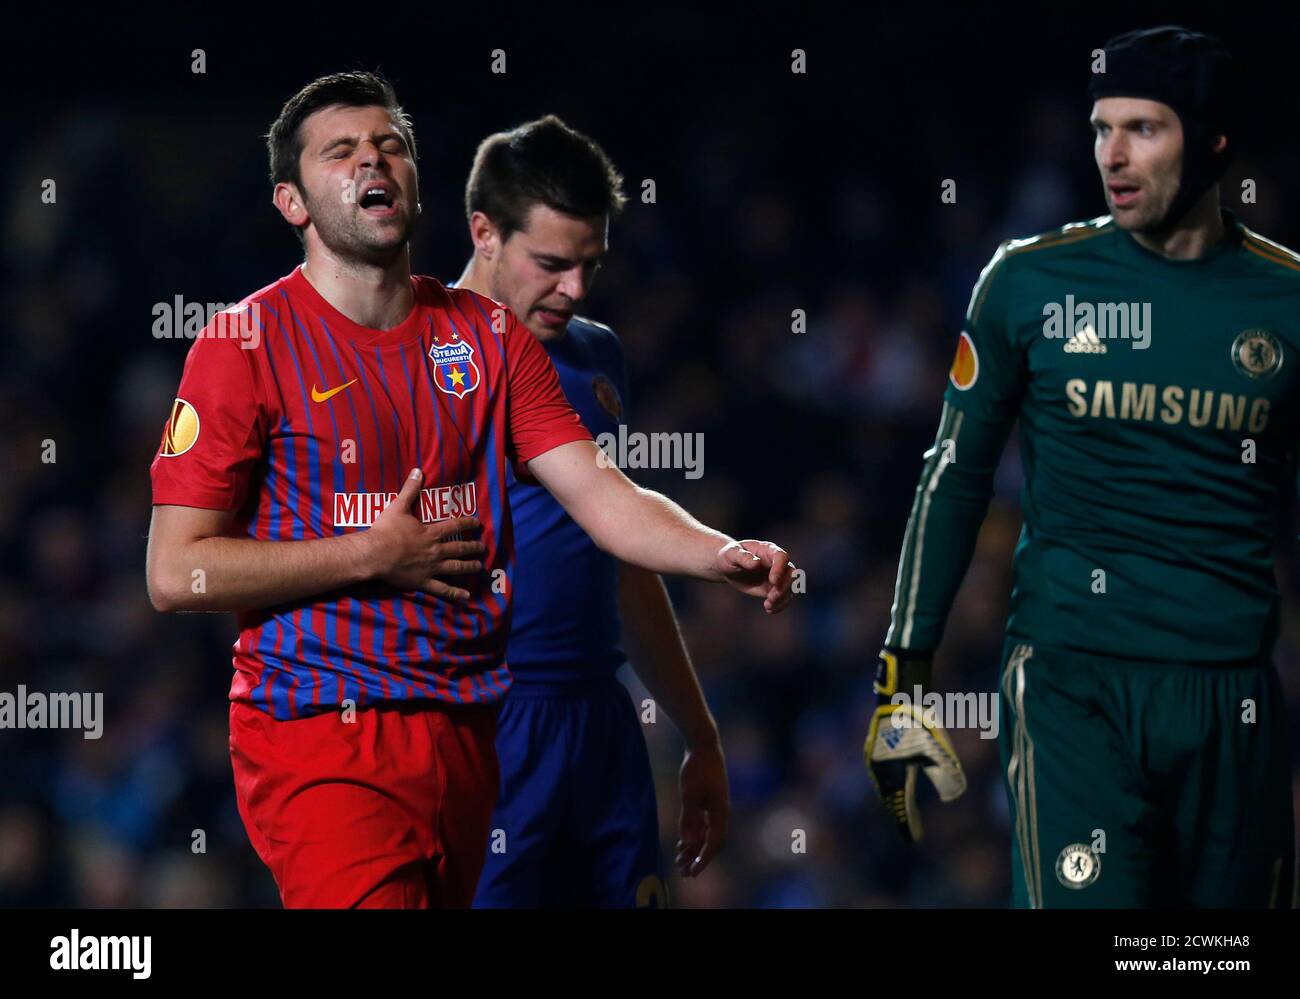 Steaua Bucharest's Raul Rusescu reacts as Chelsea's Cesar Azpilicueta and  goalkeeper Petr Cech look on during their Europa League soccer match at  Stamford Bridge in London March 14, 2013. REUTERS/Suzanne Plunkett (BRITAIN  -